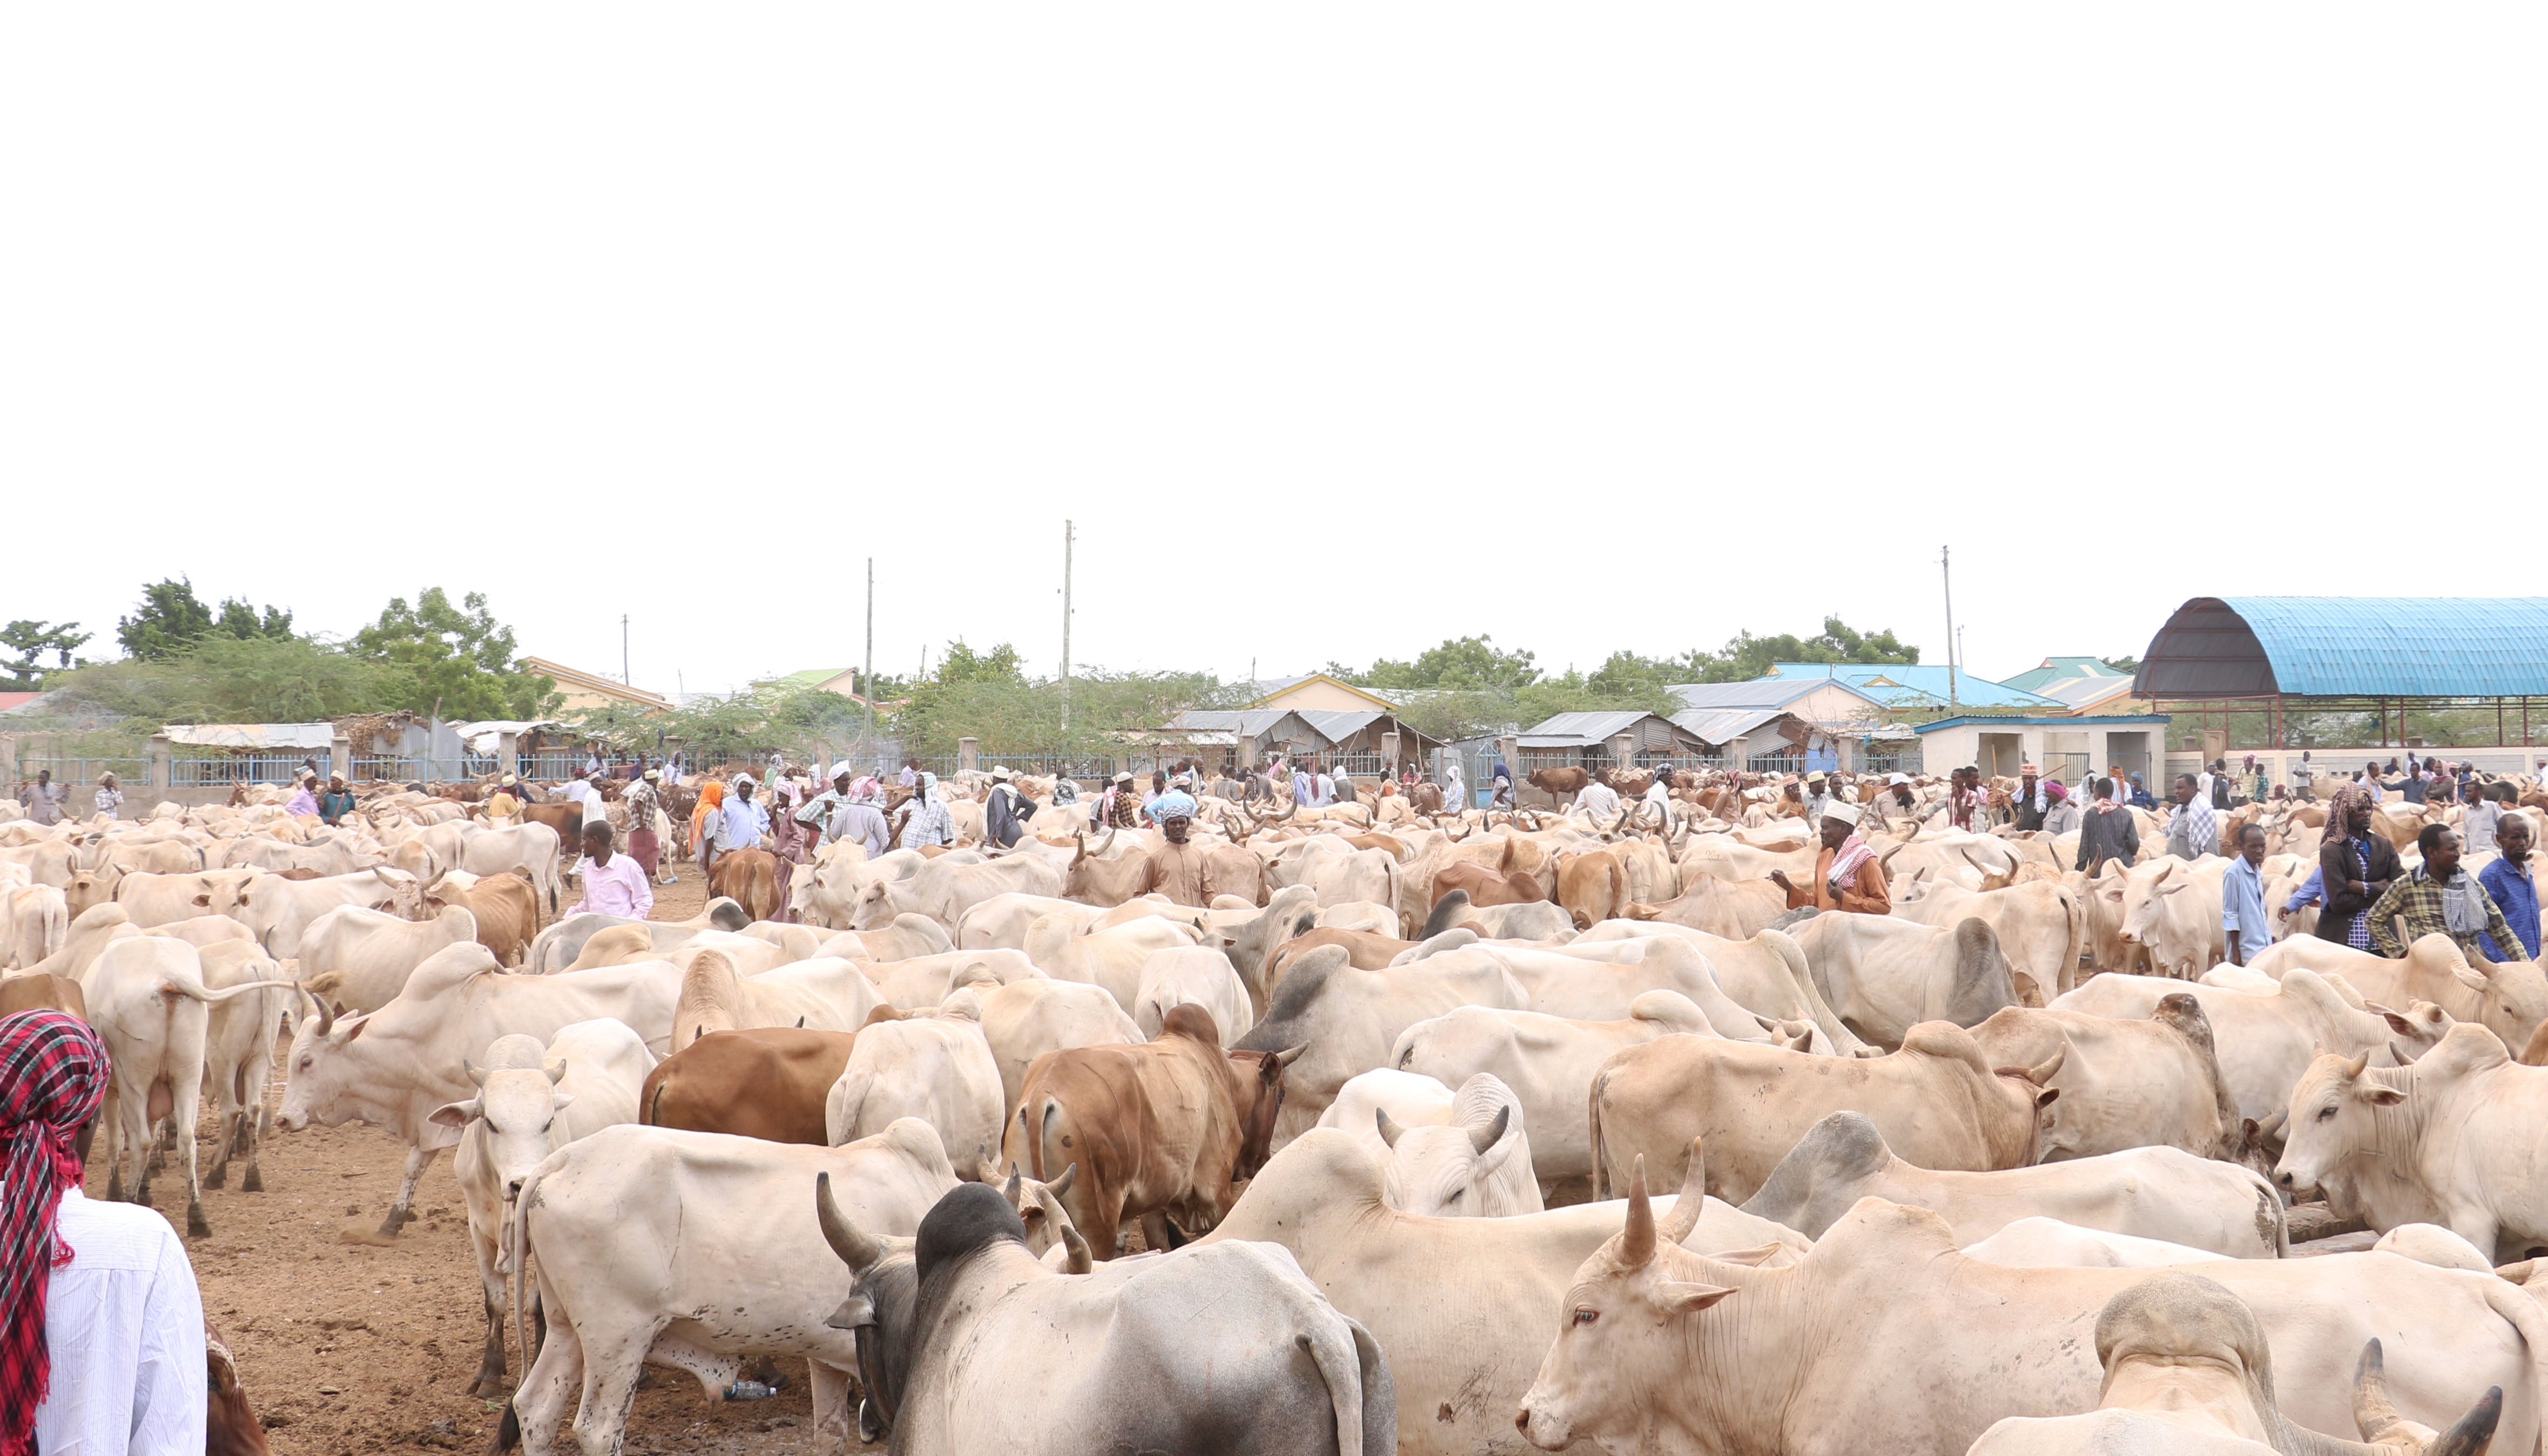 Read LIVESTOCK TRADE IN EAST AFRICA by East Africa Trade and Investment Hub